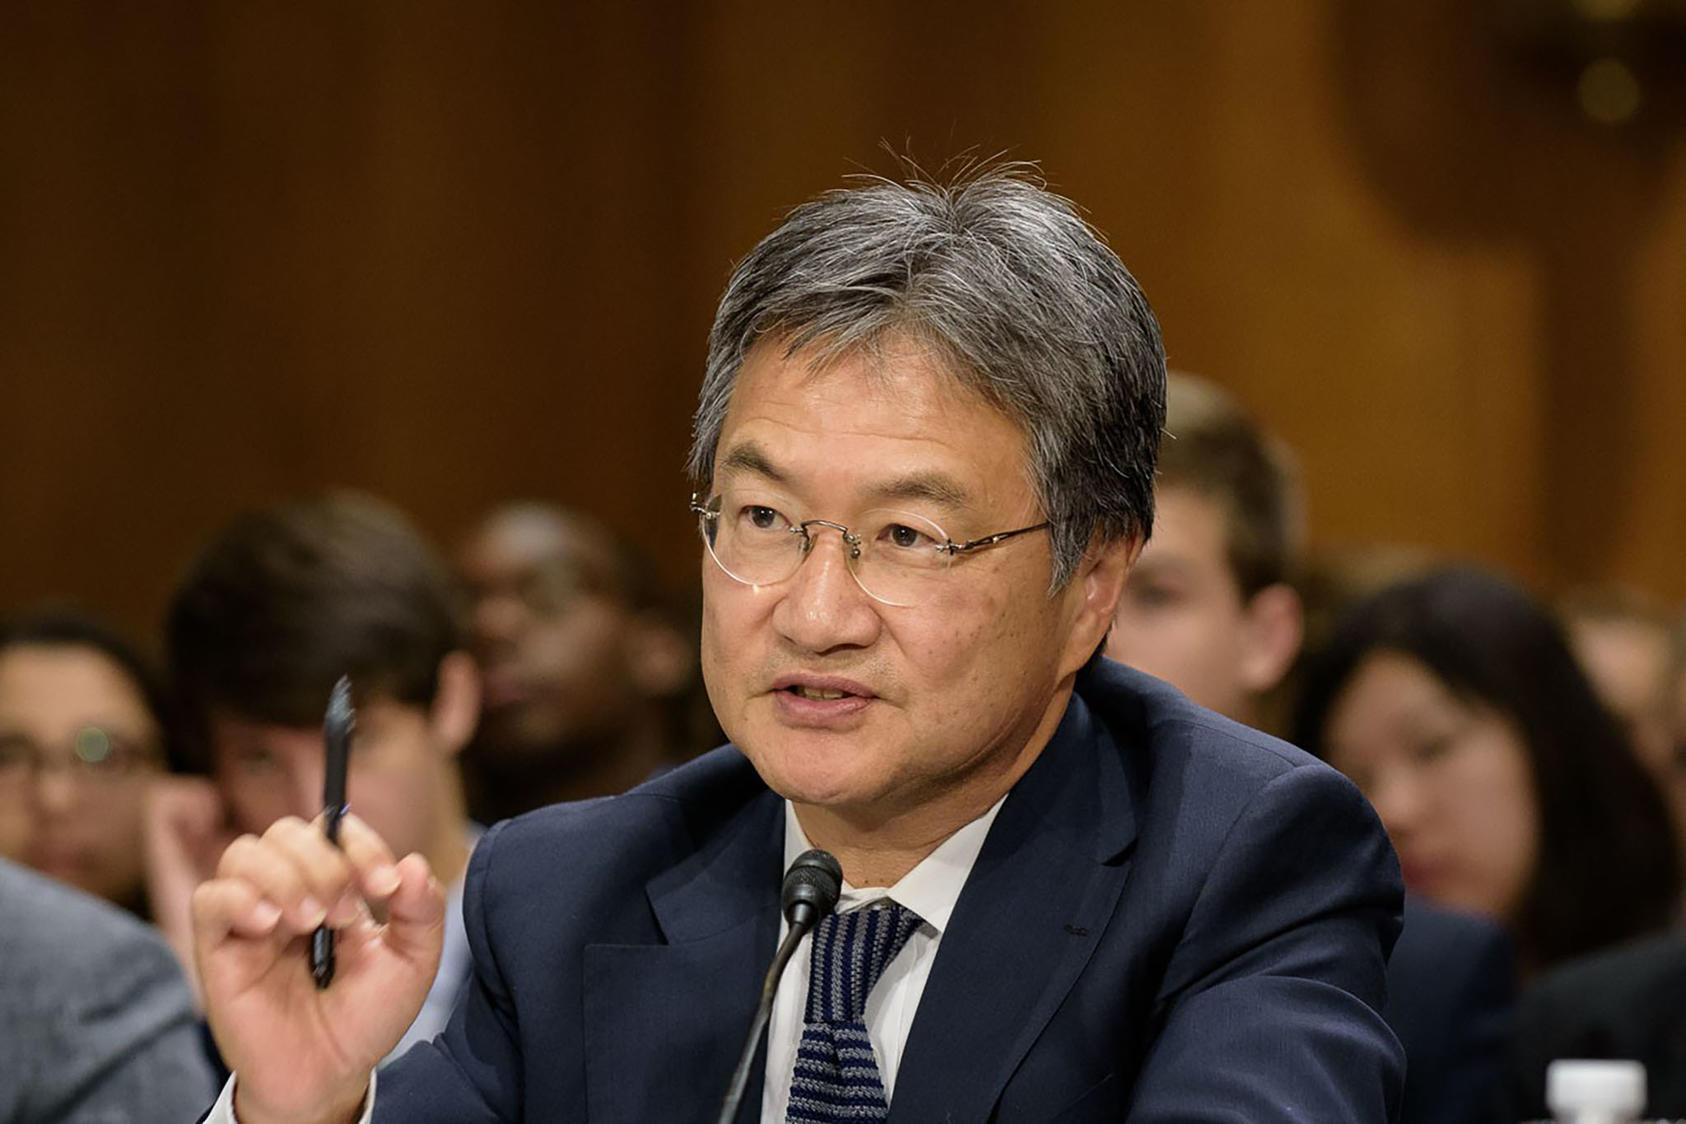 Ambassador Joseph Yun testifying before the Senate Foreign Relations Subcommittee on East Asia, The Pacific, and International Cybersecurity Policy